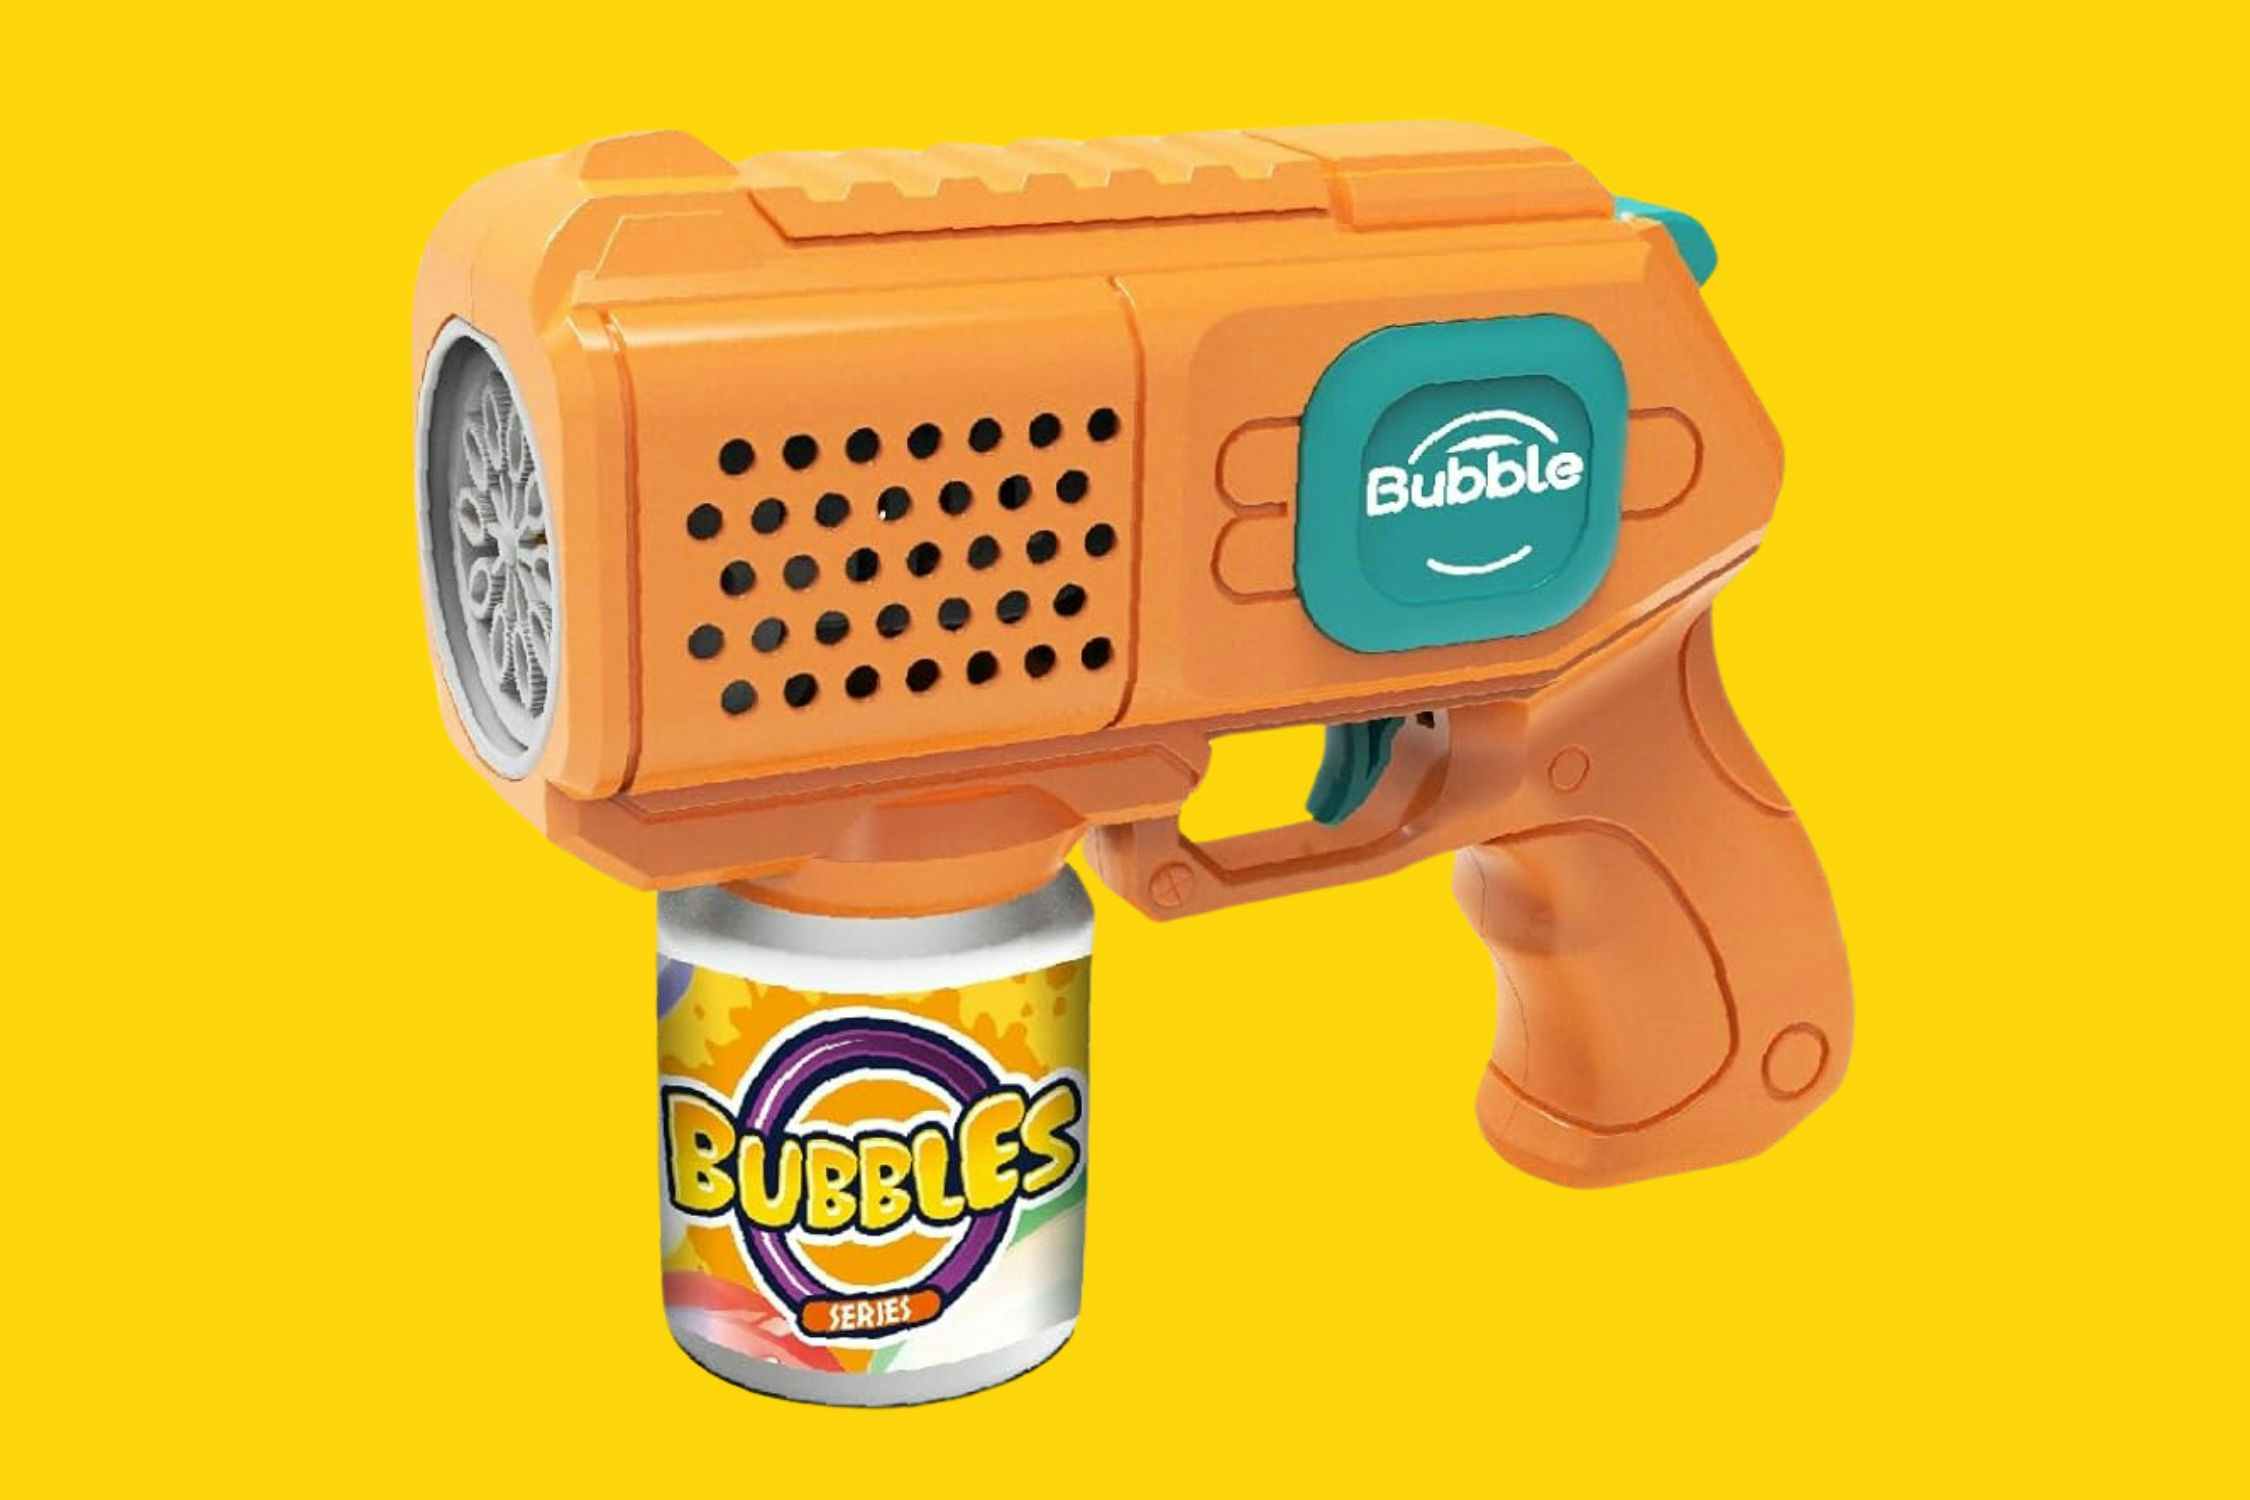 Bubble Machine and Bubble Solution, Just $7 on Amazon